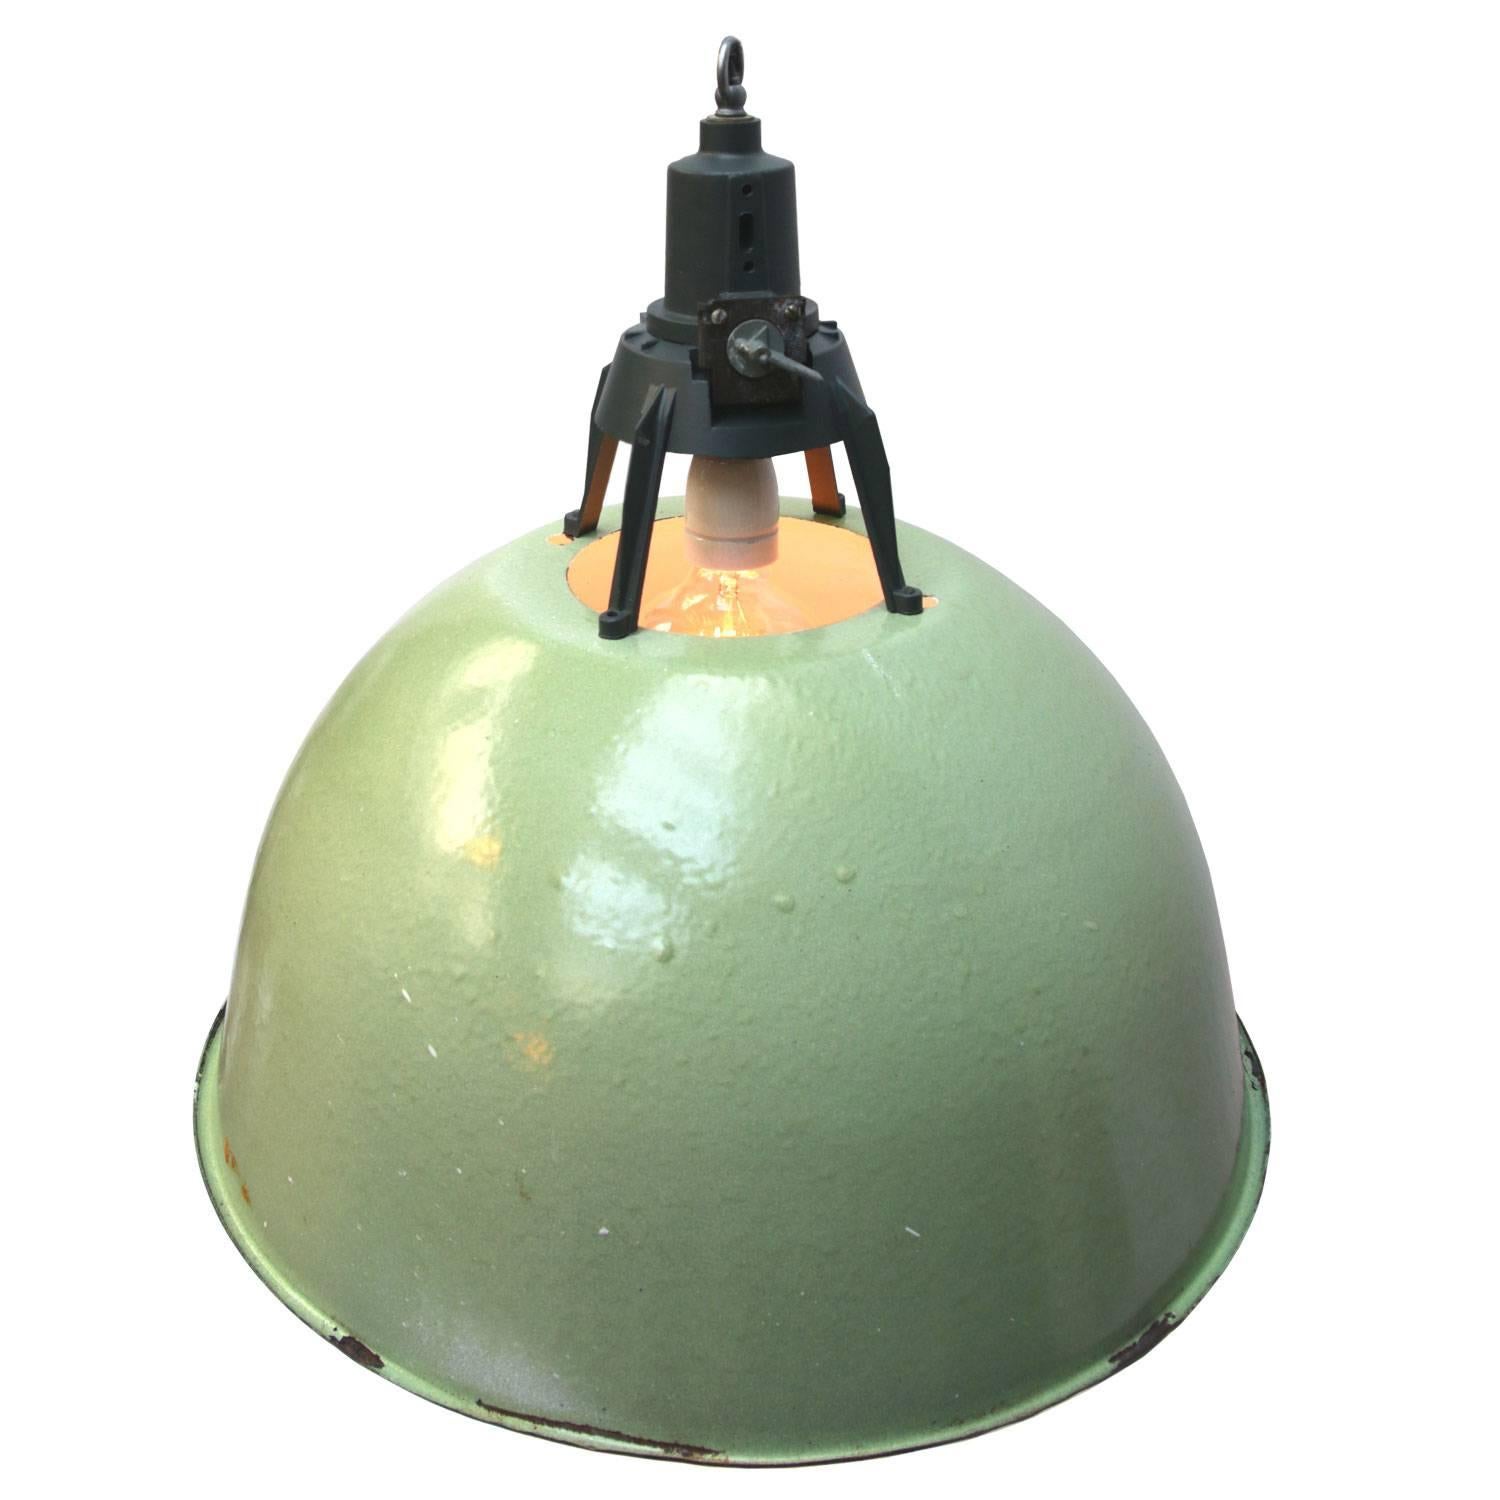 Enamel industrial pendant. Light green enamel shade. 
White inside. Dark grey cast aluminium top.

Weight: 4.4 kg / 9.7 lb

All lamps have been made suitable by international standards for incandescent light bulbs, energy-efficient and LED bulbs.